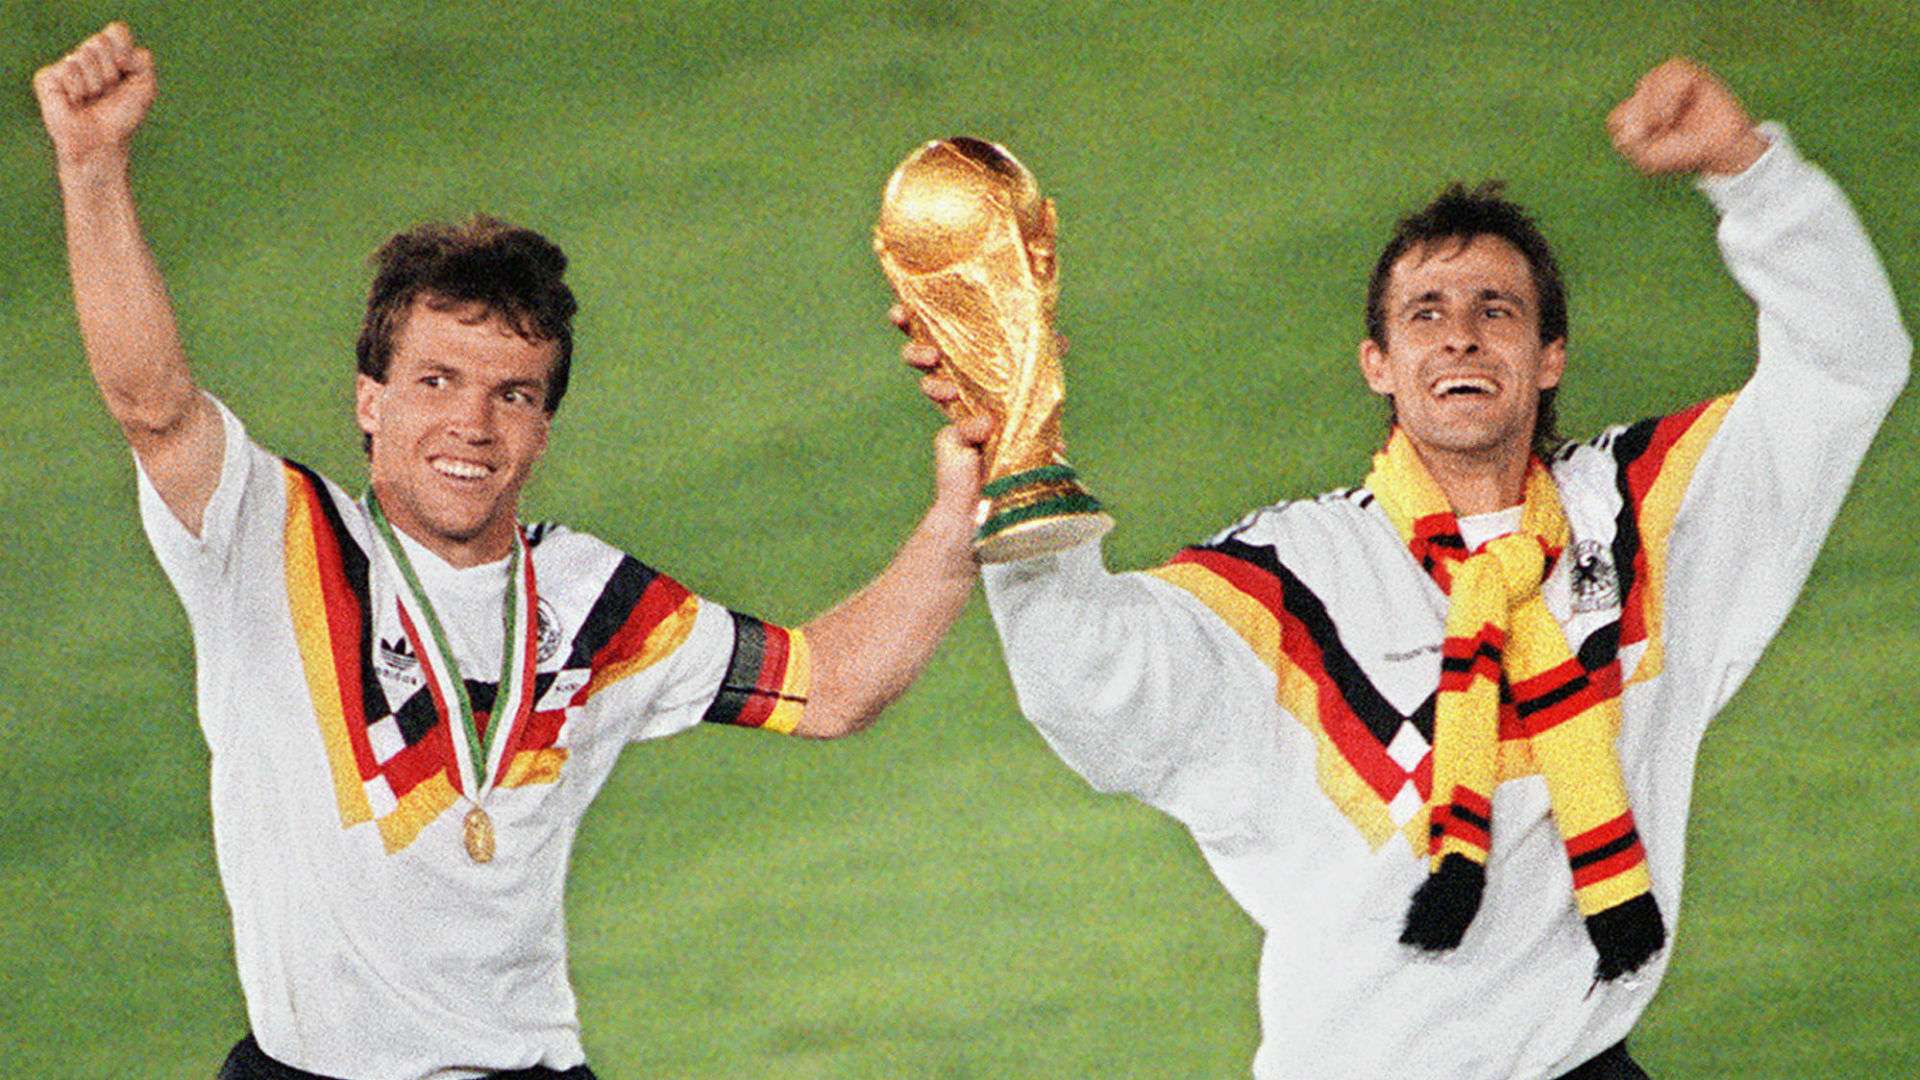 The climate will be pleasant in Qatar' legend Lothar Matthaus expects a fantastic 2022 World Cup experience